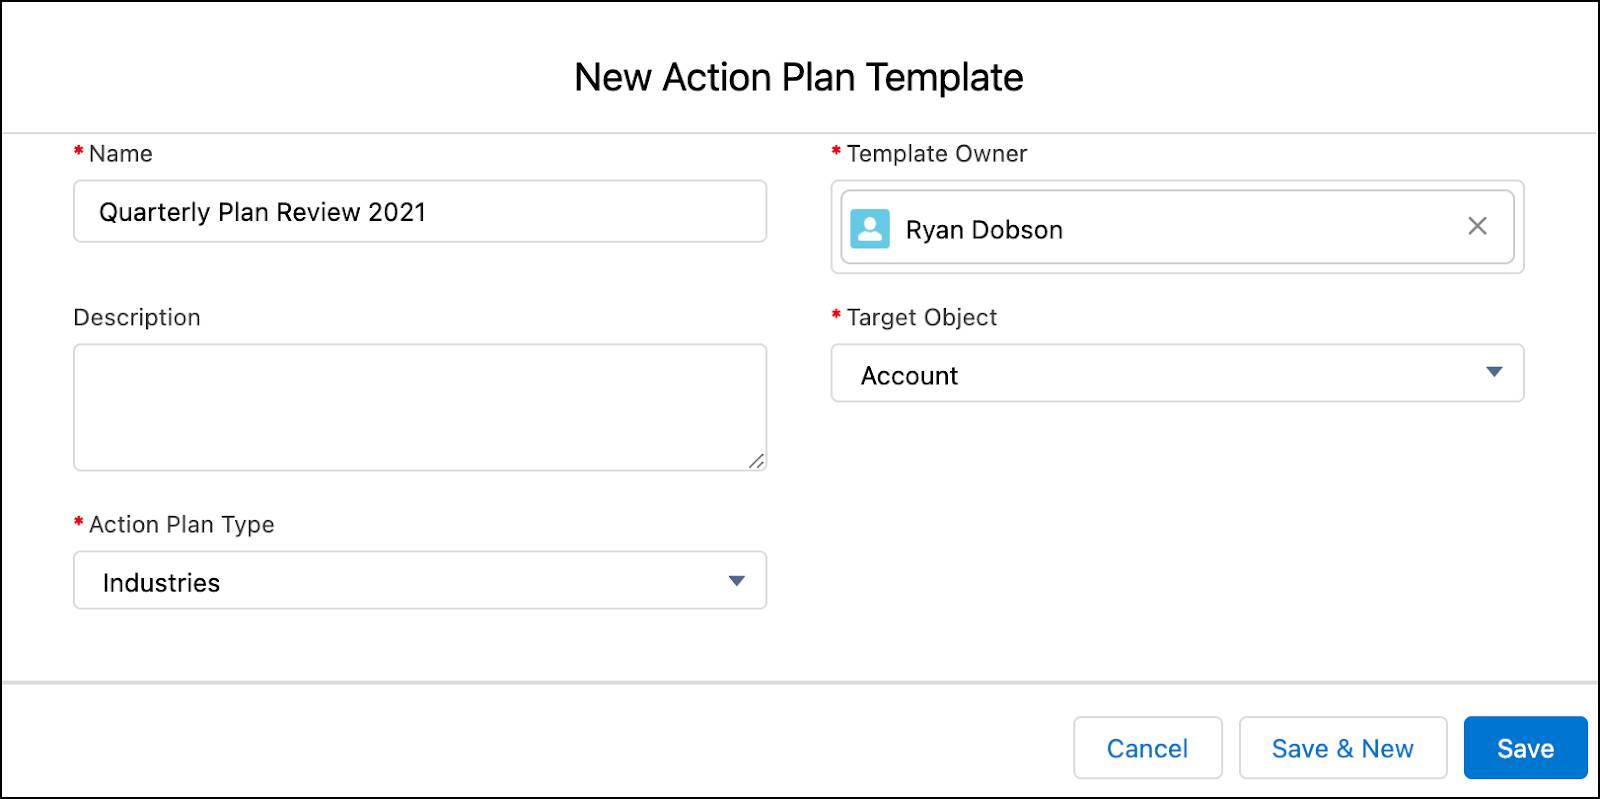 The New Action Plan Template window.